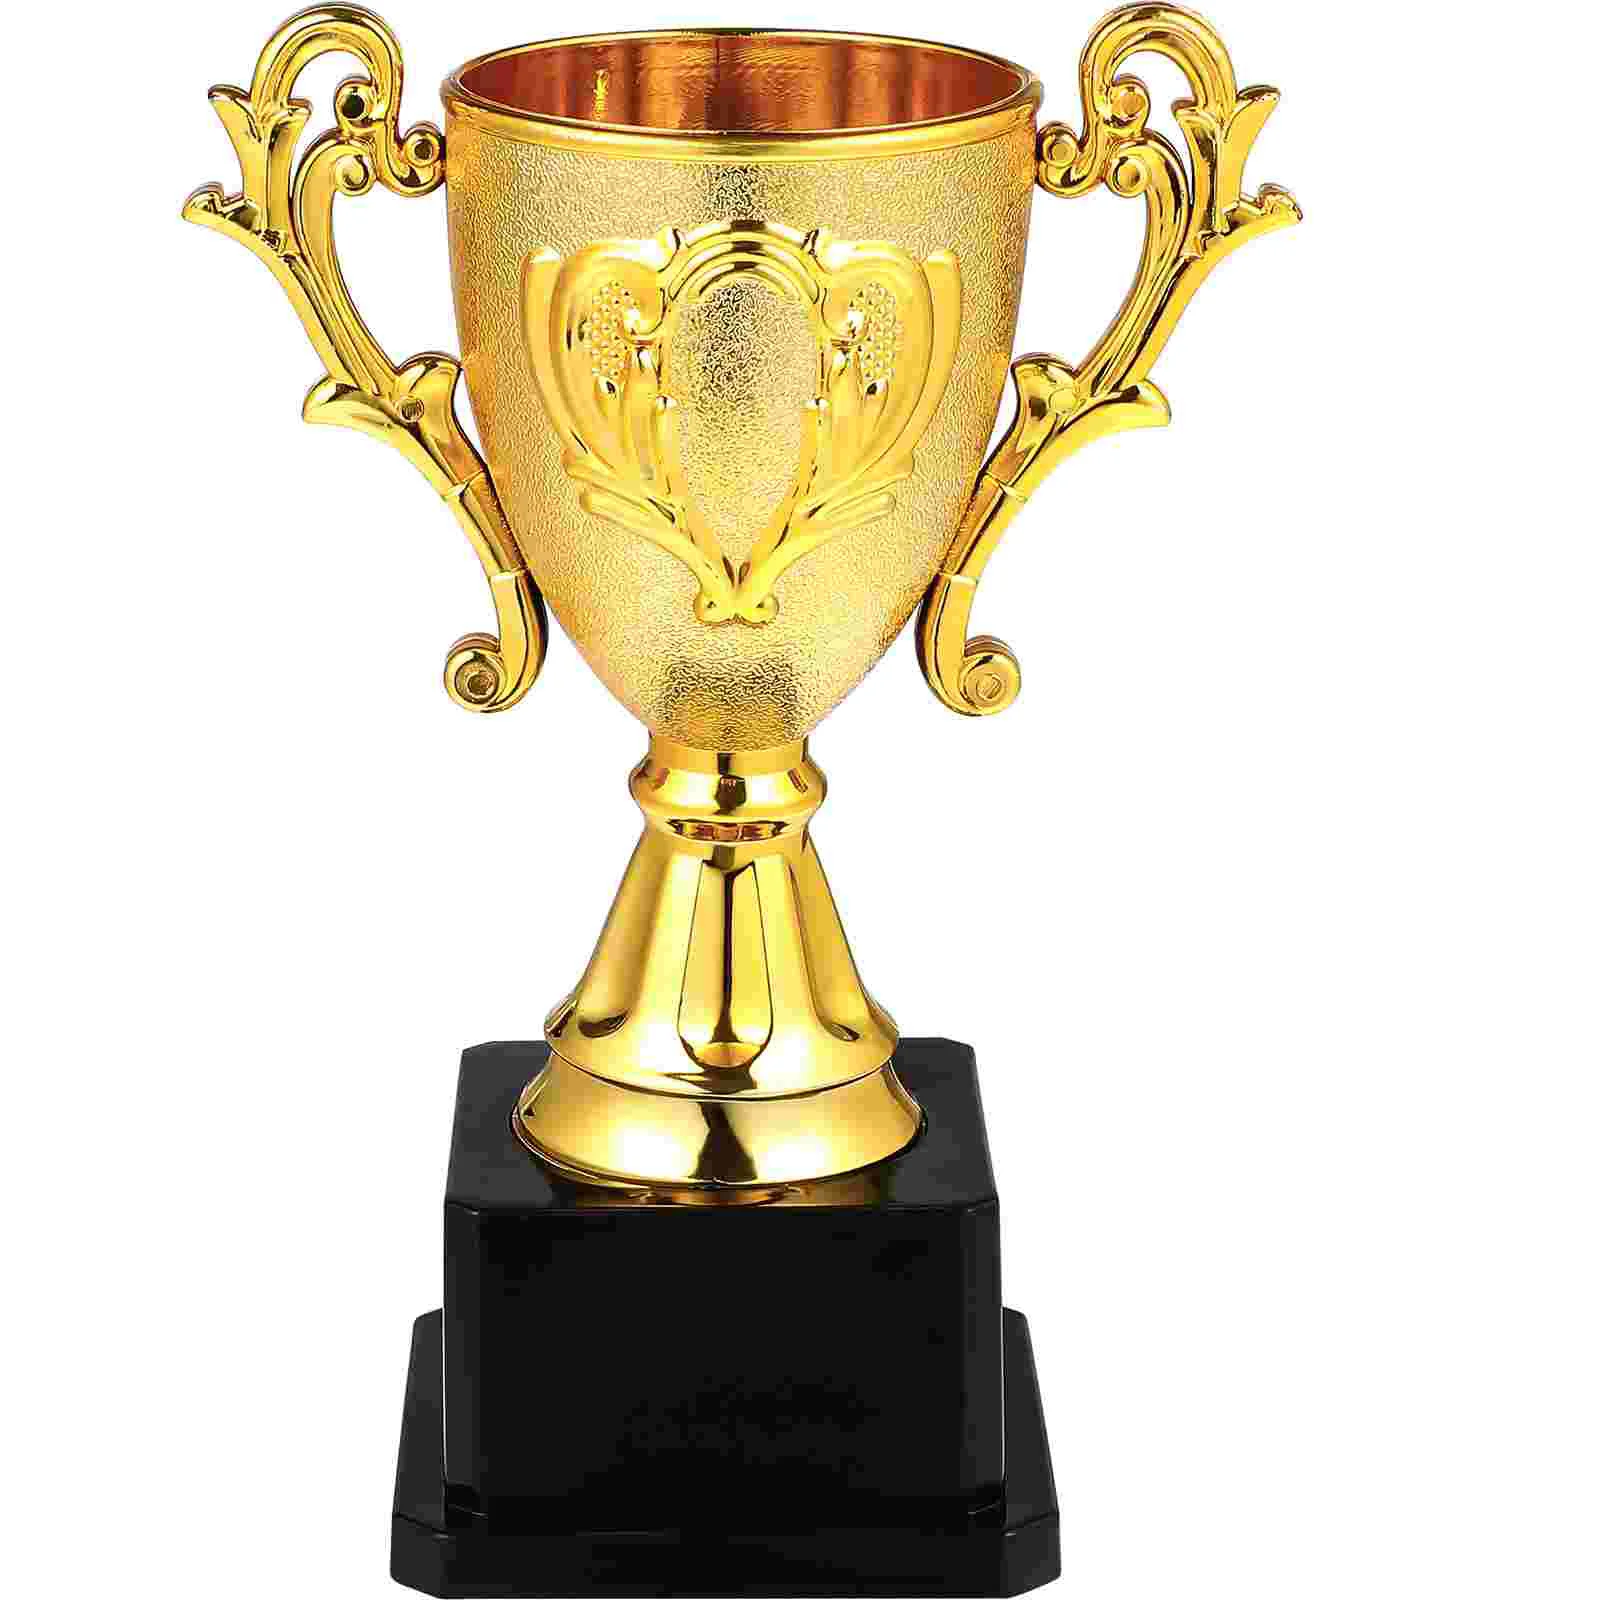 

Trophies Games Competition Trophy Kidcraft Playset Customized Tournaments Kids Award Winner Gift Child Plastic Cup